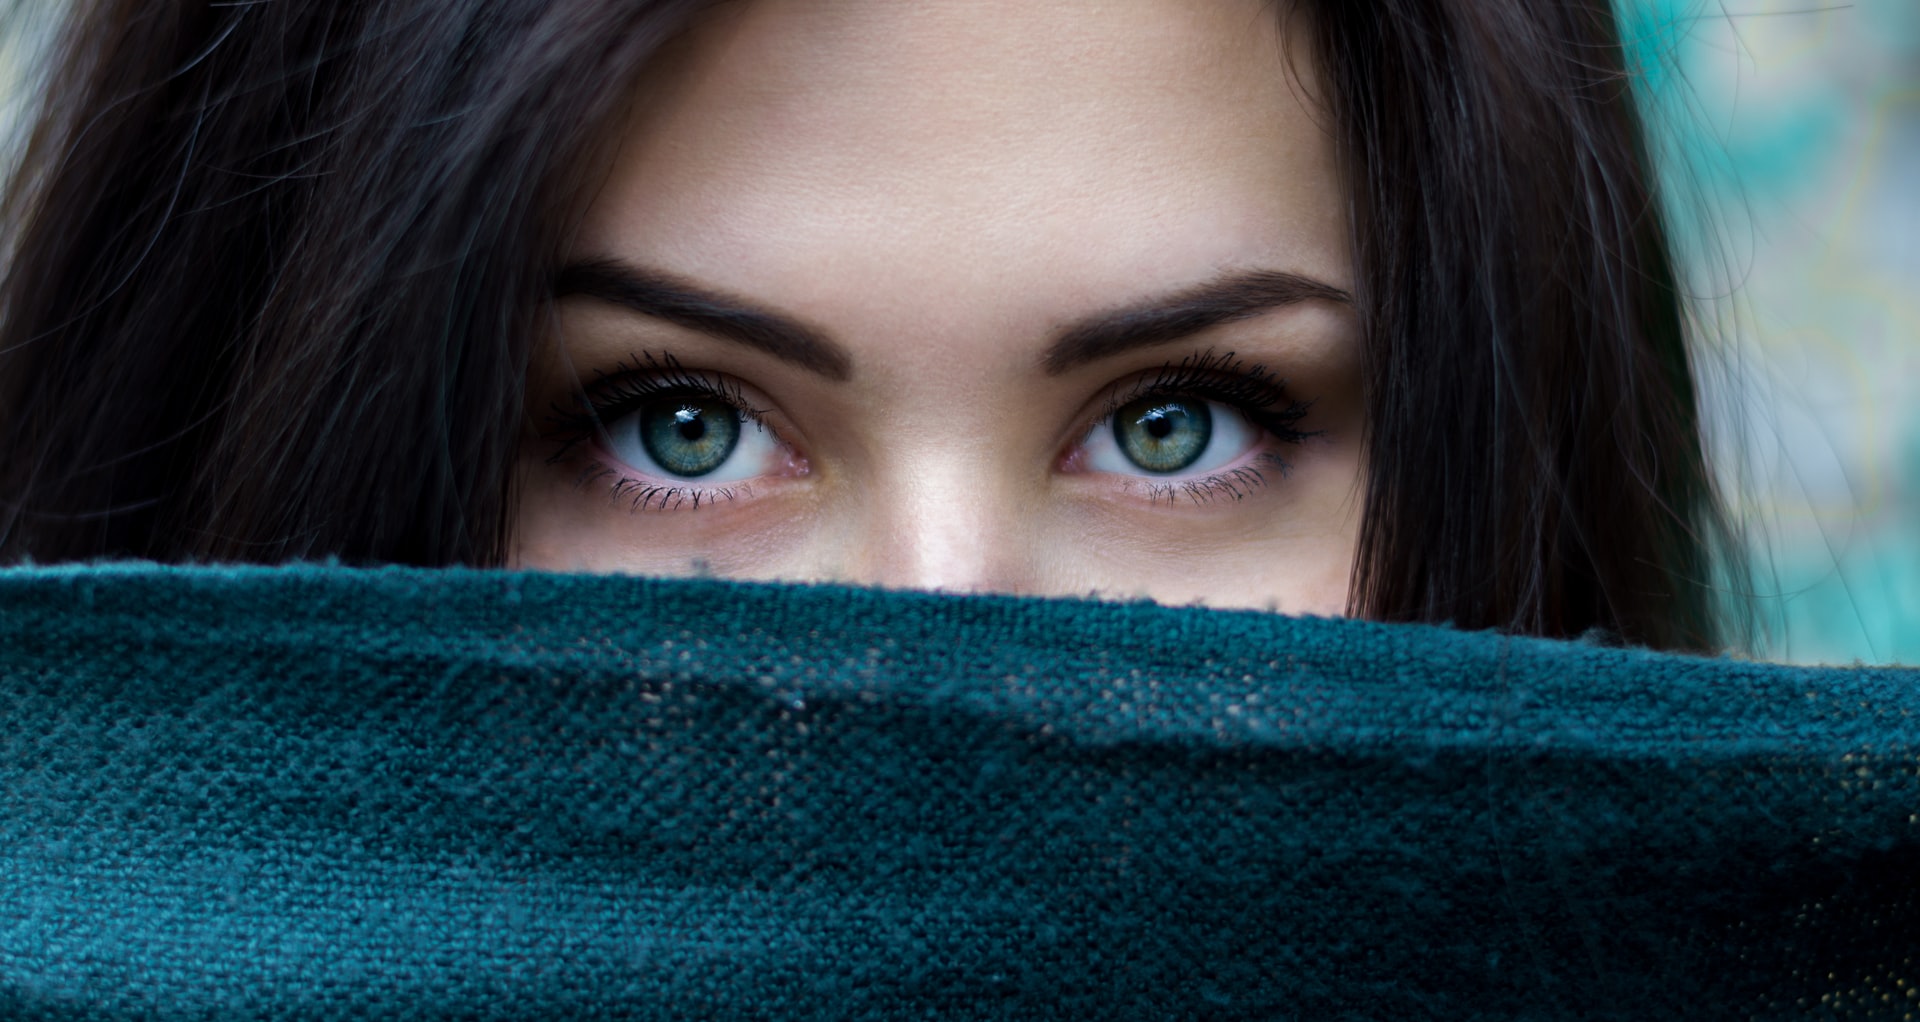 A woman with green eyes peeking over her face.